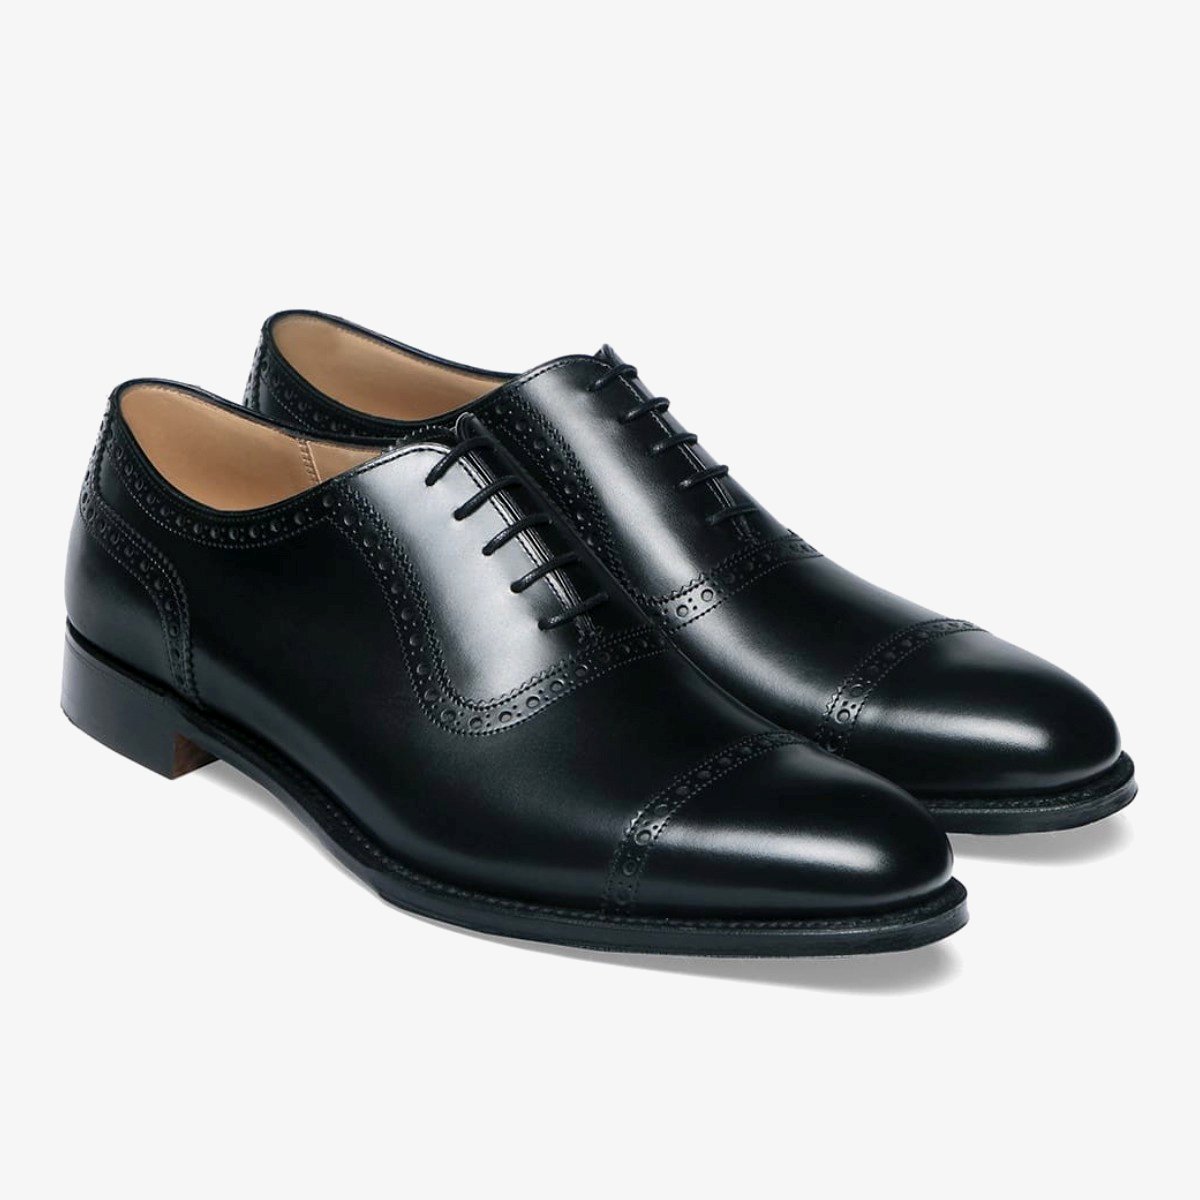 Cheaney Fenchurch black brogue oxford shoes - G fit